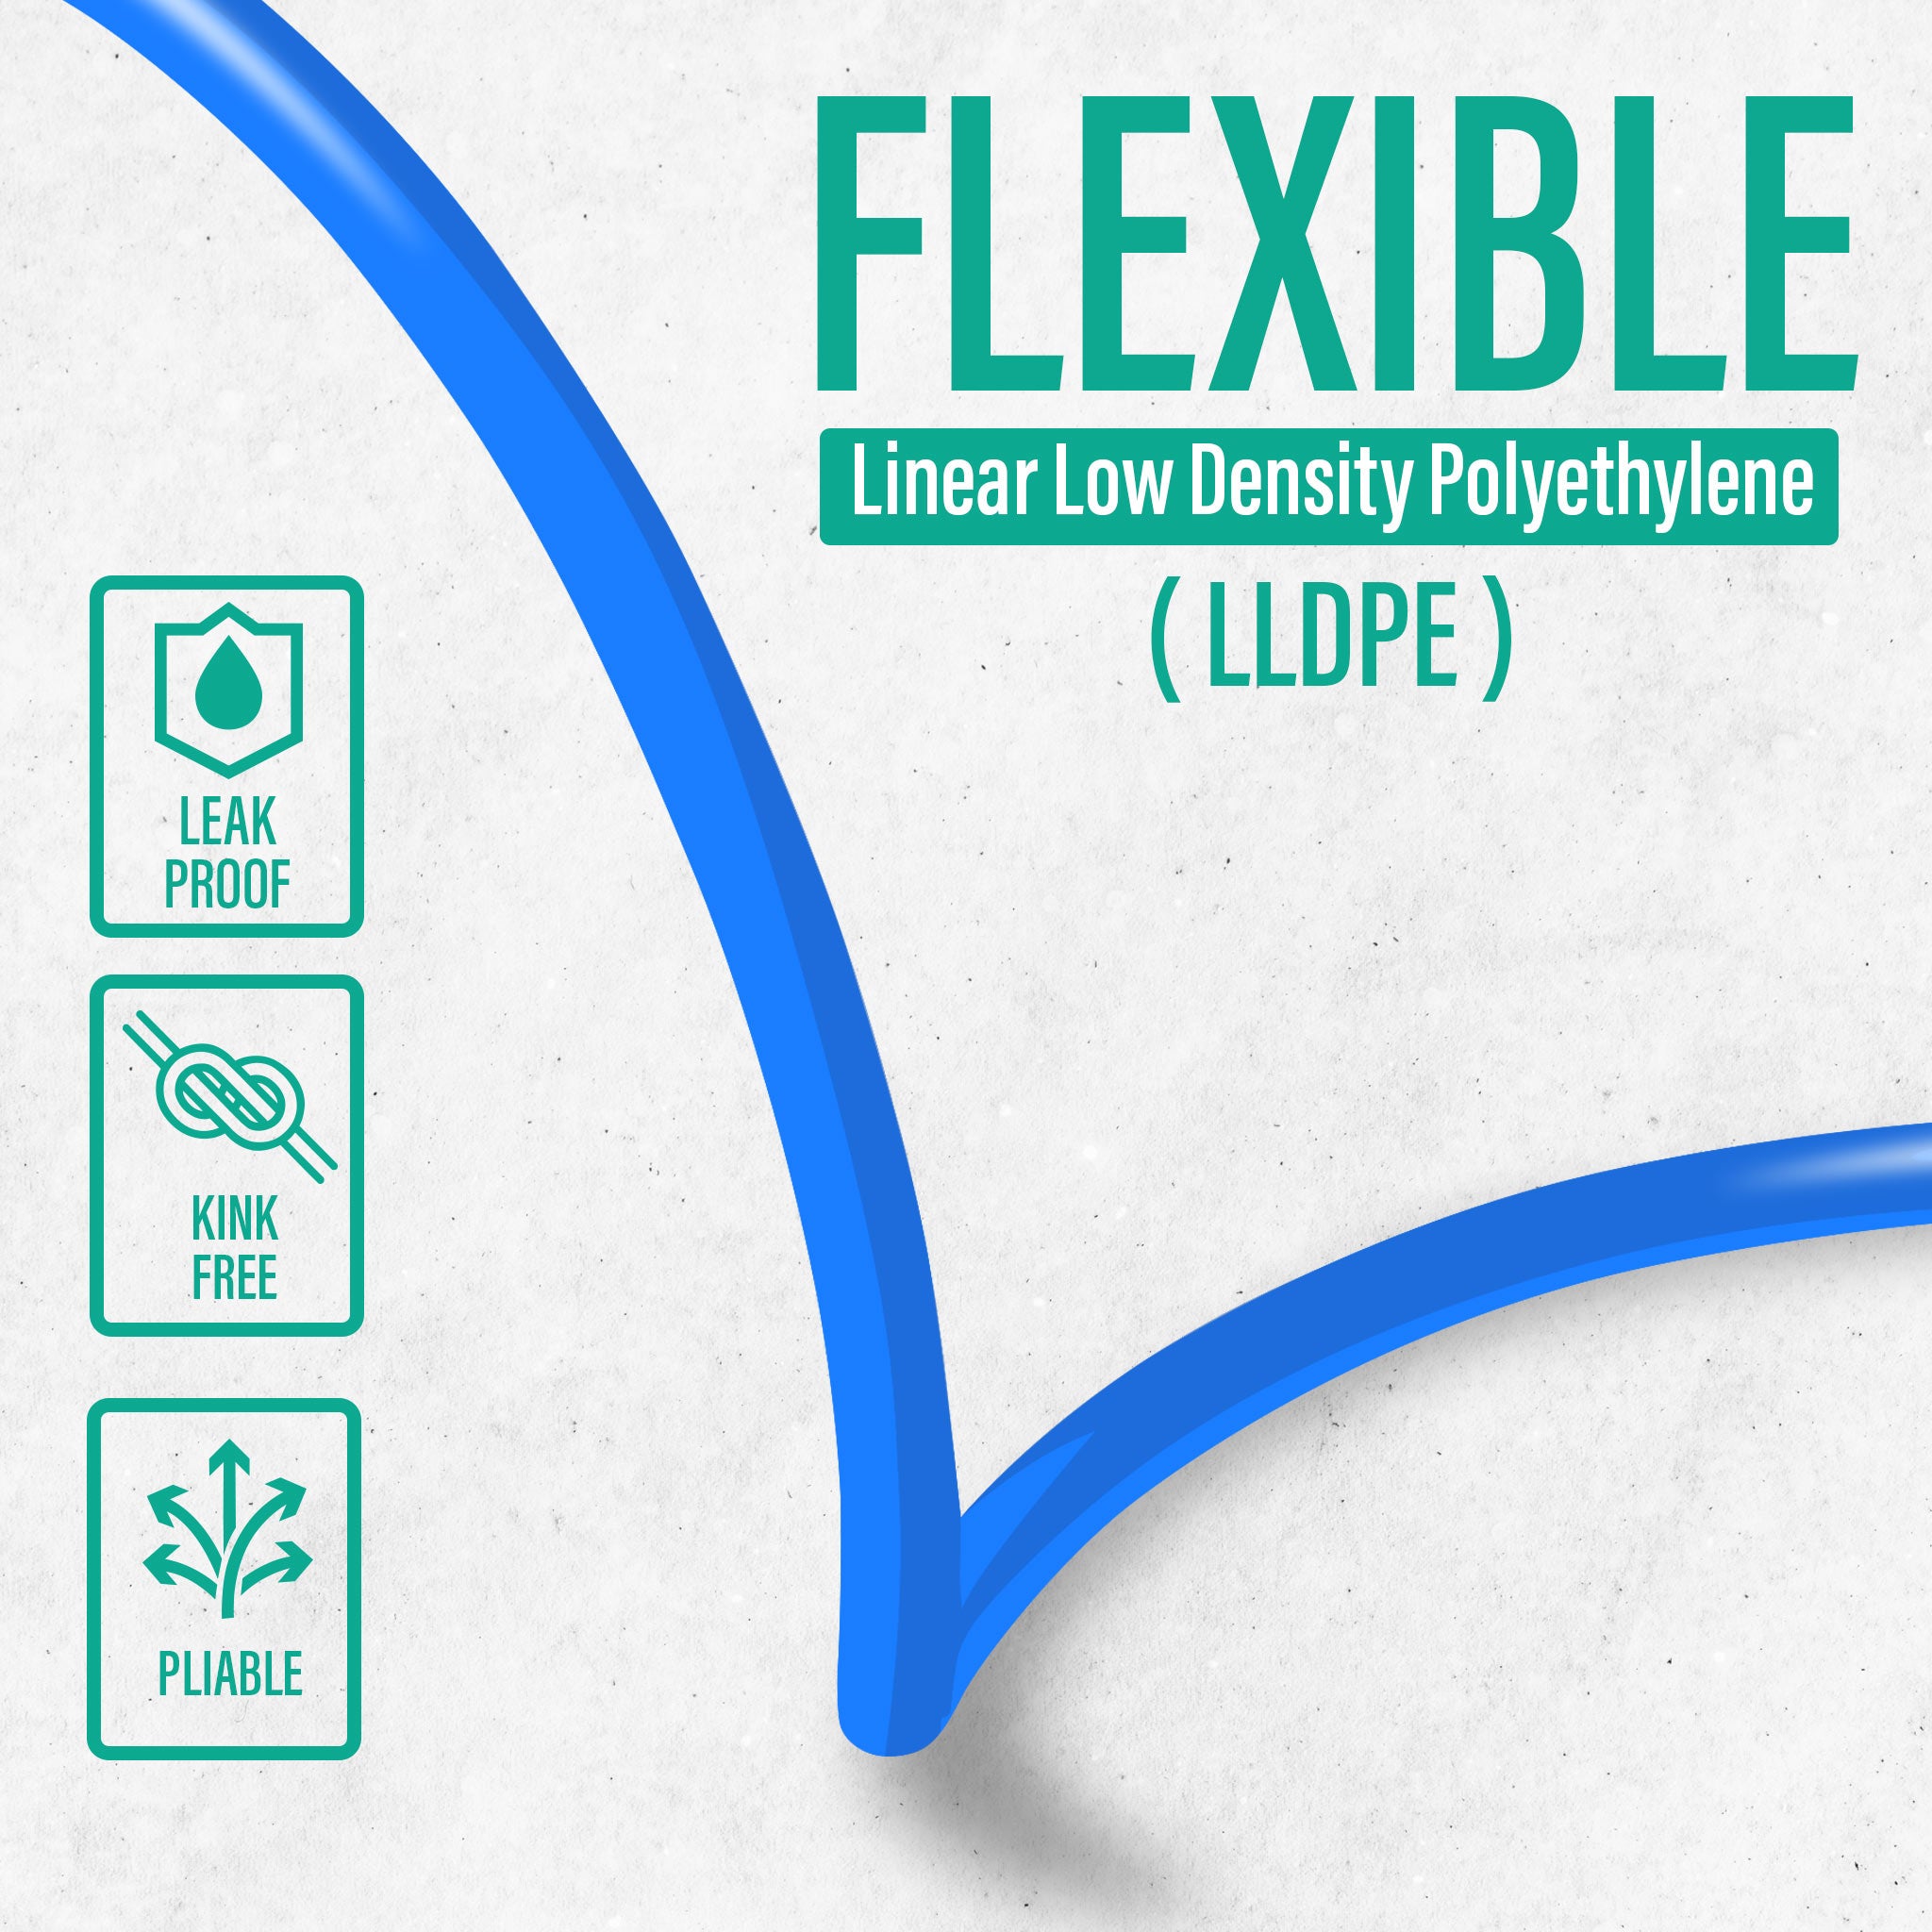 LLDPE 1/4" Tube 25 ft Roll in Metpure Retail Bag. Certified by NSF. For Reverse Osmosis De-ionized Water Filtration Systems, Refrigerators, and Other Appliances. Blue Color